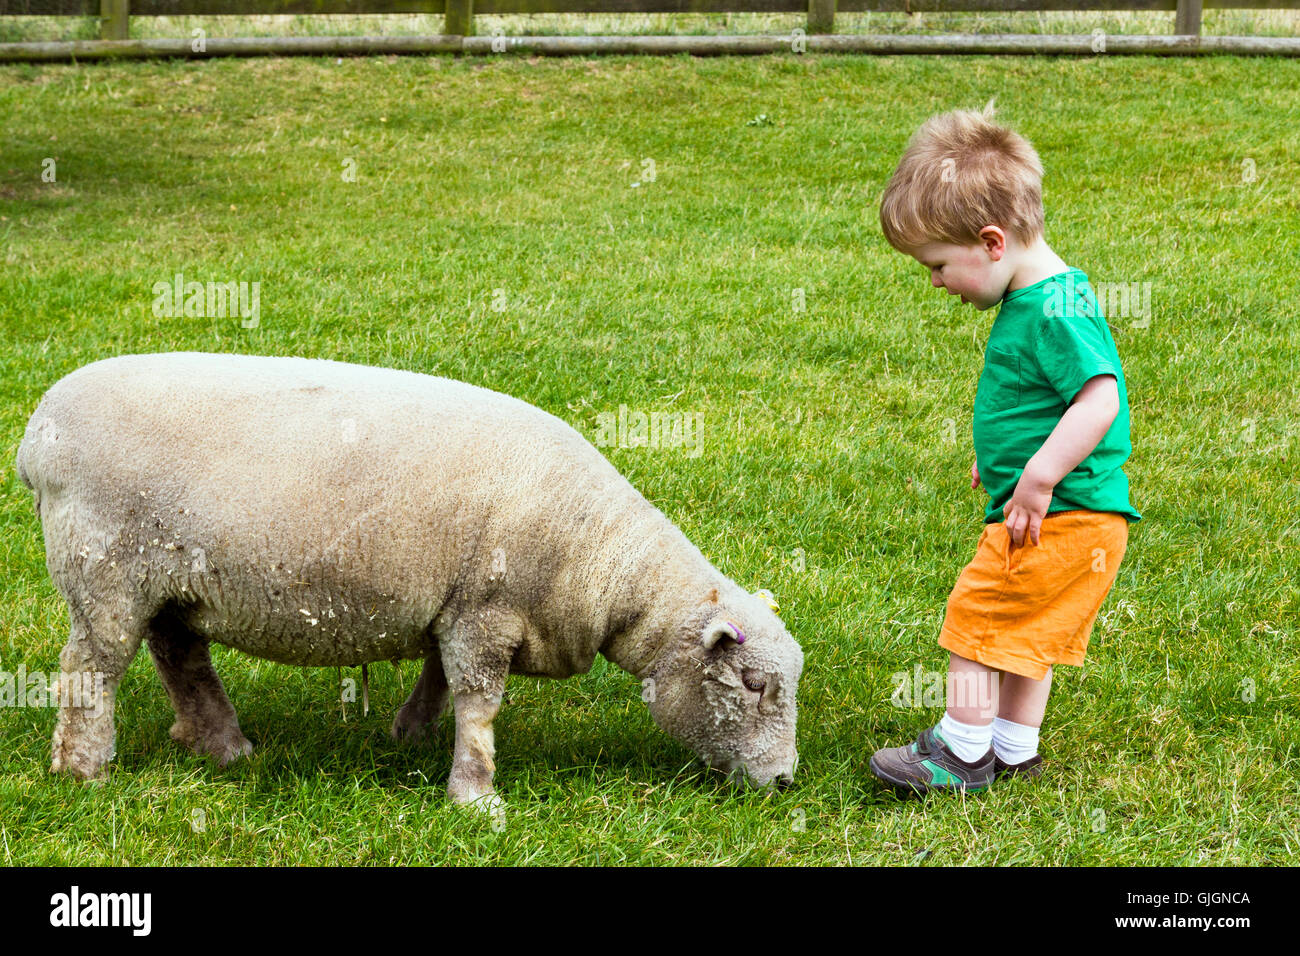 Toddler and sheep Stock Photo